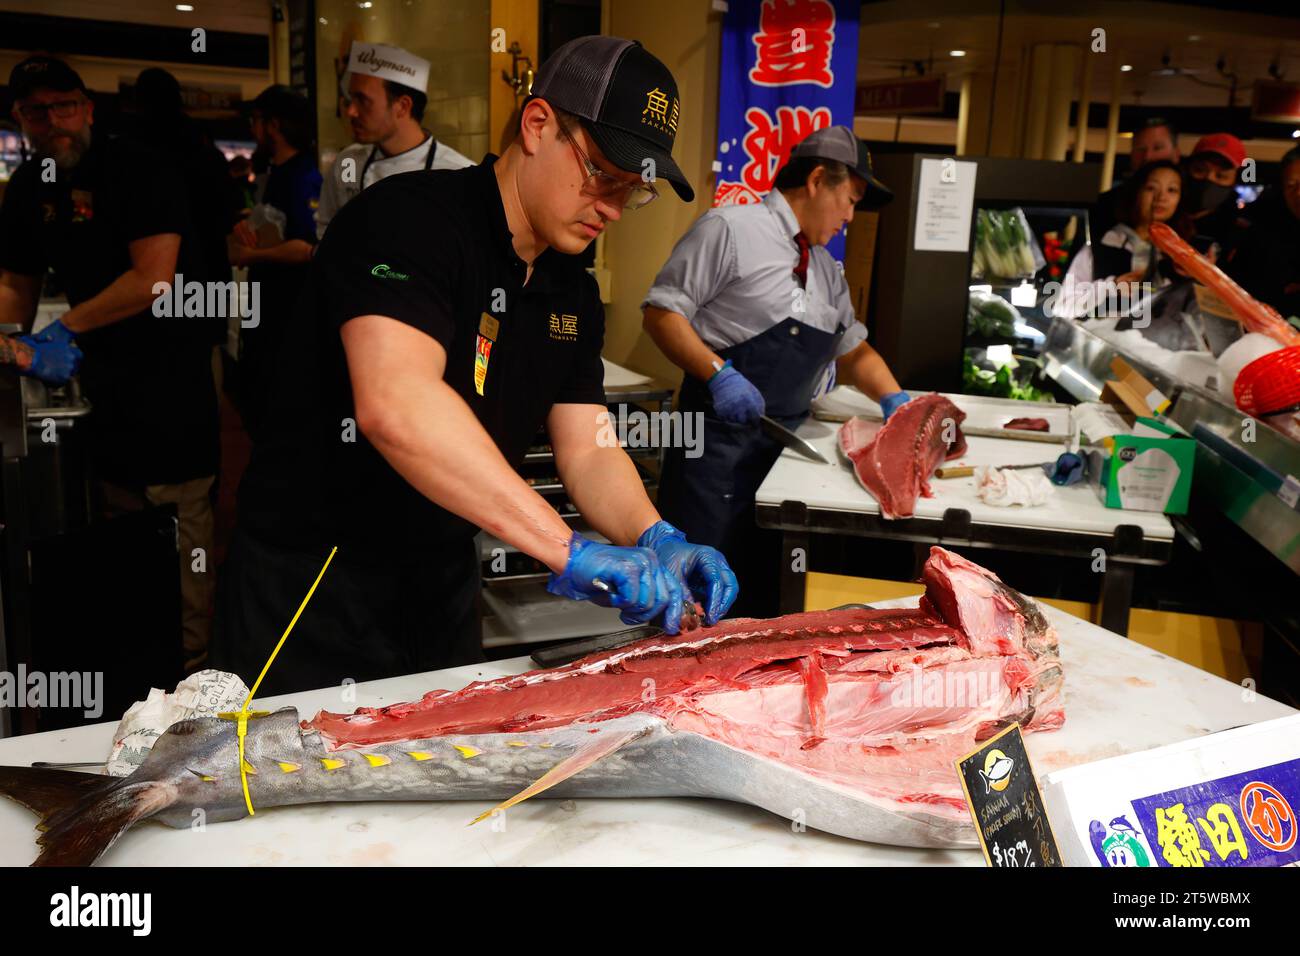 05 November 2023, New York. A fishmonger scrapes meat from the rib bones (nakaochi) off a small wild caught MSC Atlantic Bluefin Tuna (Thunnus thynnus) hon maguro; in the background, a Japanese expert fishmonger prepare cuts of akami and otoro from a tuna loin. At the Sakanaya fish market inside Wegmans Astor Place. The fish counter features domestic fresh fish and seafood, and Japanese fish imported from Tokyo's Toyosu Fish Market. Stock Photo